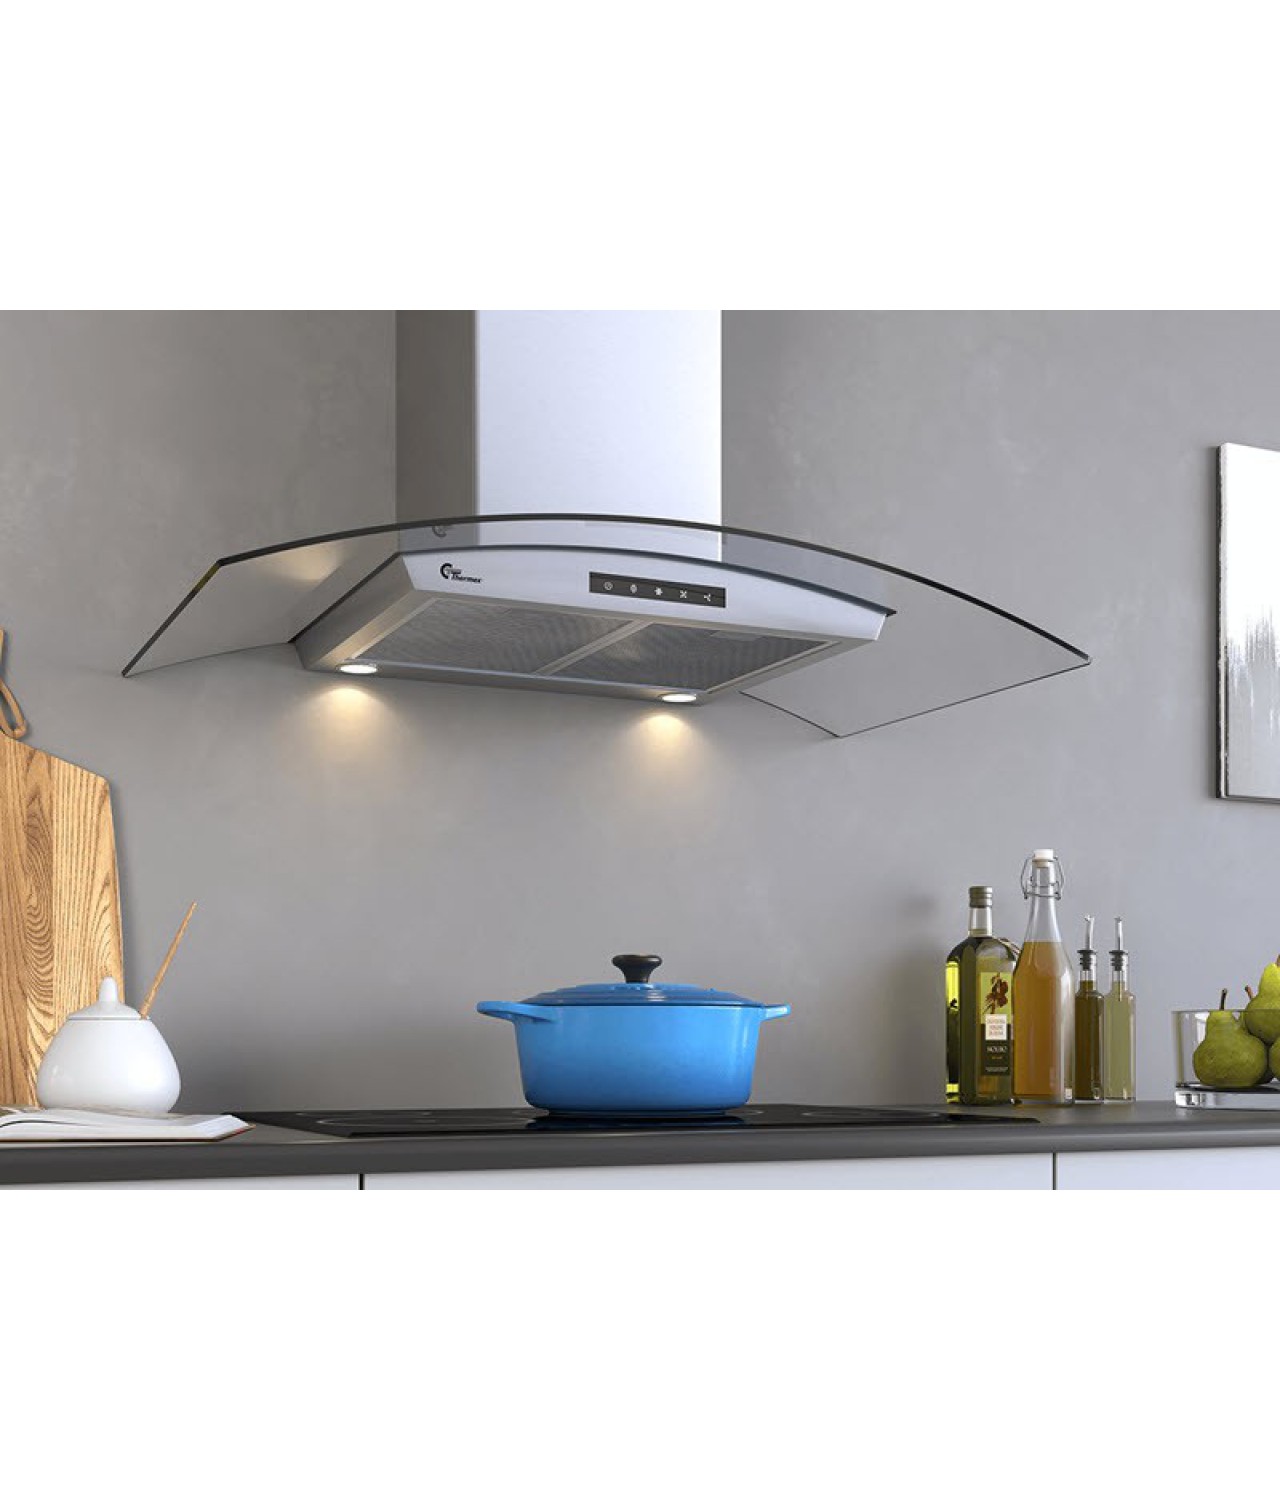 Wall mounted cooker hood Derby glass-stainless steel - installed